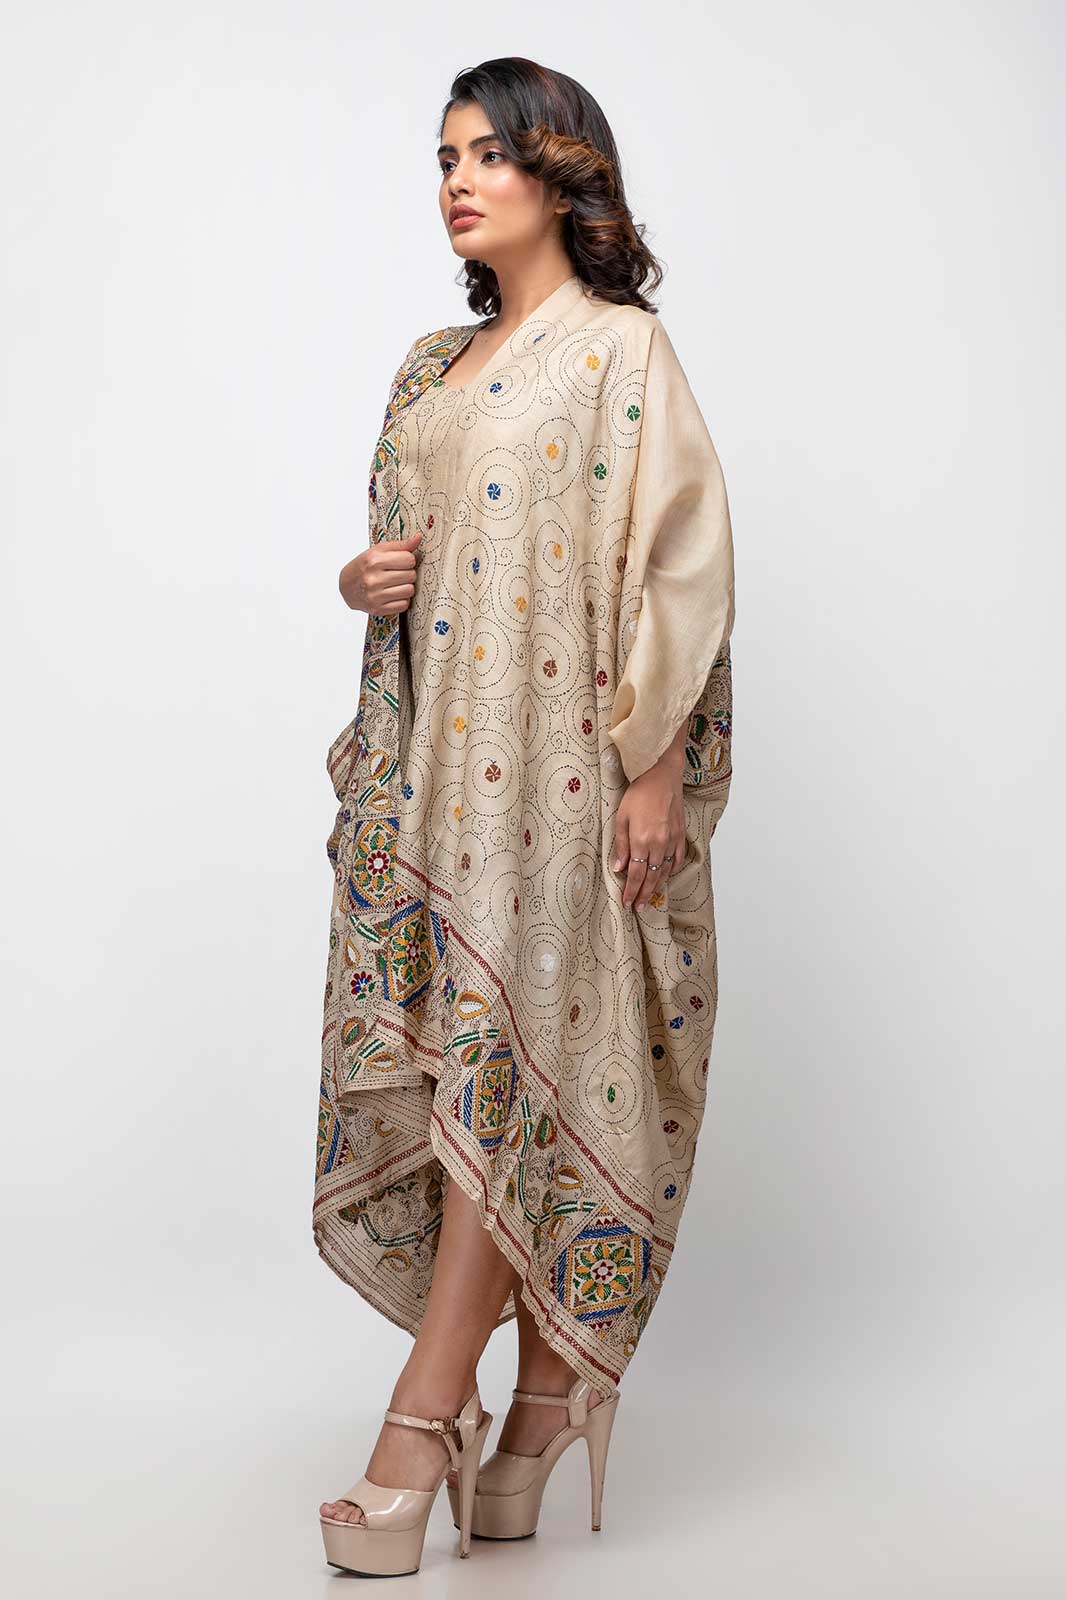 ladies cotton clothing , organic cotton handmade dress, full length cotton a line dress, long women dresses, women's long sleeve dresses, handmade cotton dress, handwoven cotton dress, handmade cotton linen dress,  handwoven printed dresses, knee length dresses formal, , knee length dresses plus size, knee length dress casual, ladies cotton clothing, Indian designer clothing brand, sustainable clothing, cotton dress with sleeves, ladies summer dress, handwoven printed dresses, cotton dress readymade, sepia stories, ladies off shoulder dress, sleeveless dress, mangalgiri cotton dress, mangalgiri cotton, cotton dress, women cotton dress, designer cotton dress, summer dresses online, latest summer collection